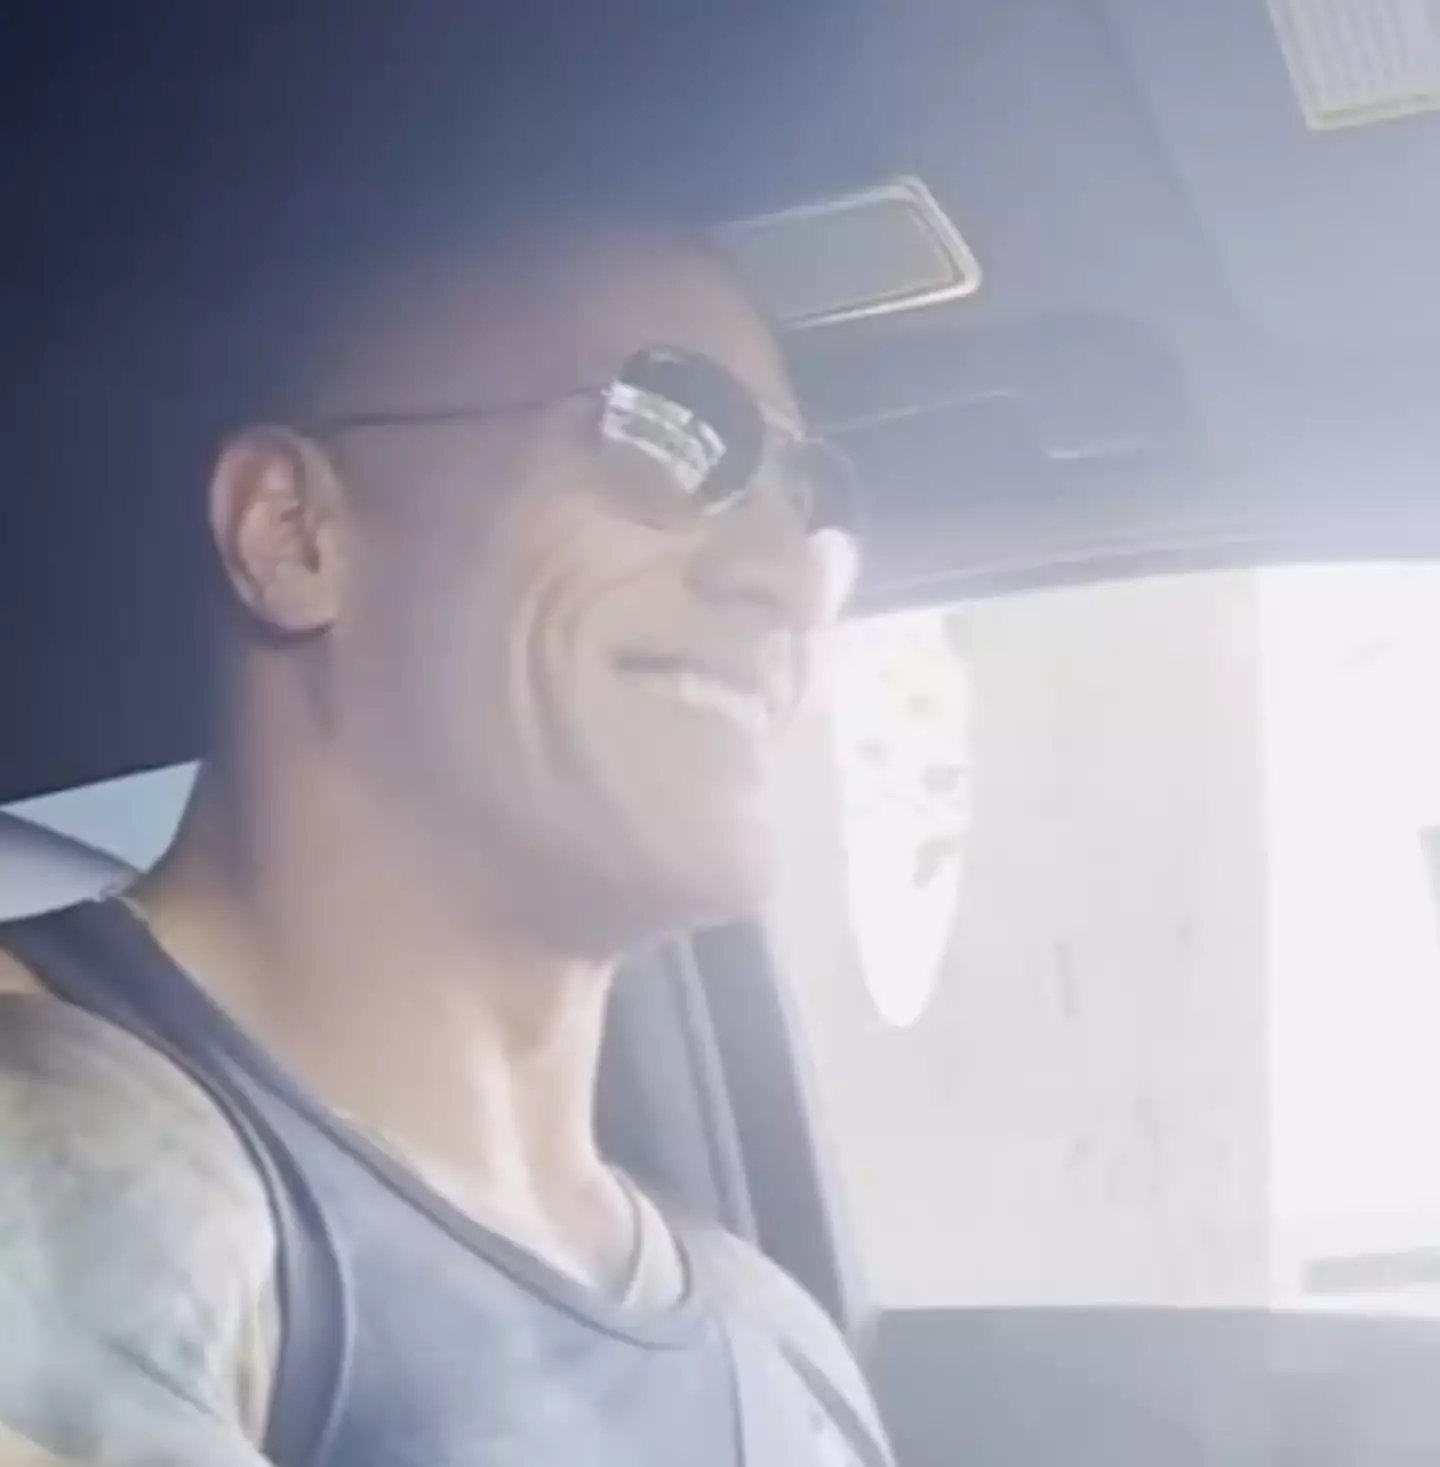 Dwayne Johnson shared his experience of going to multiple In-N-Out Burger drive-thrus.